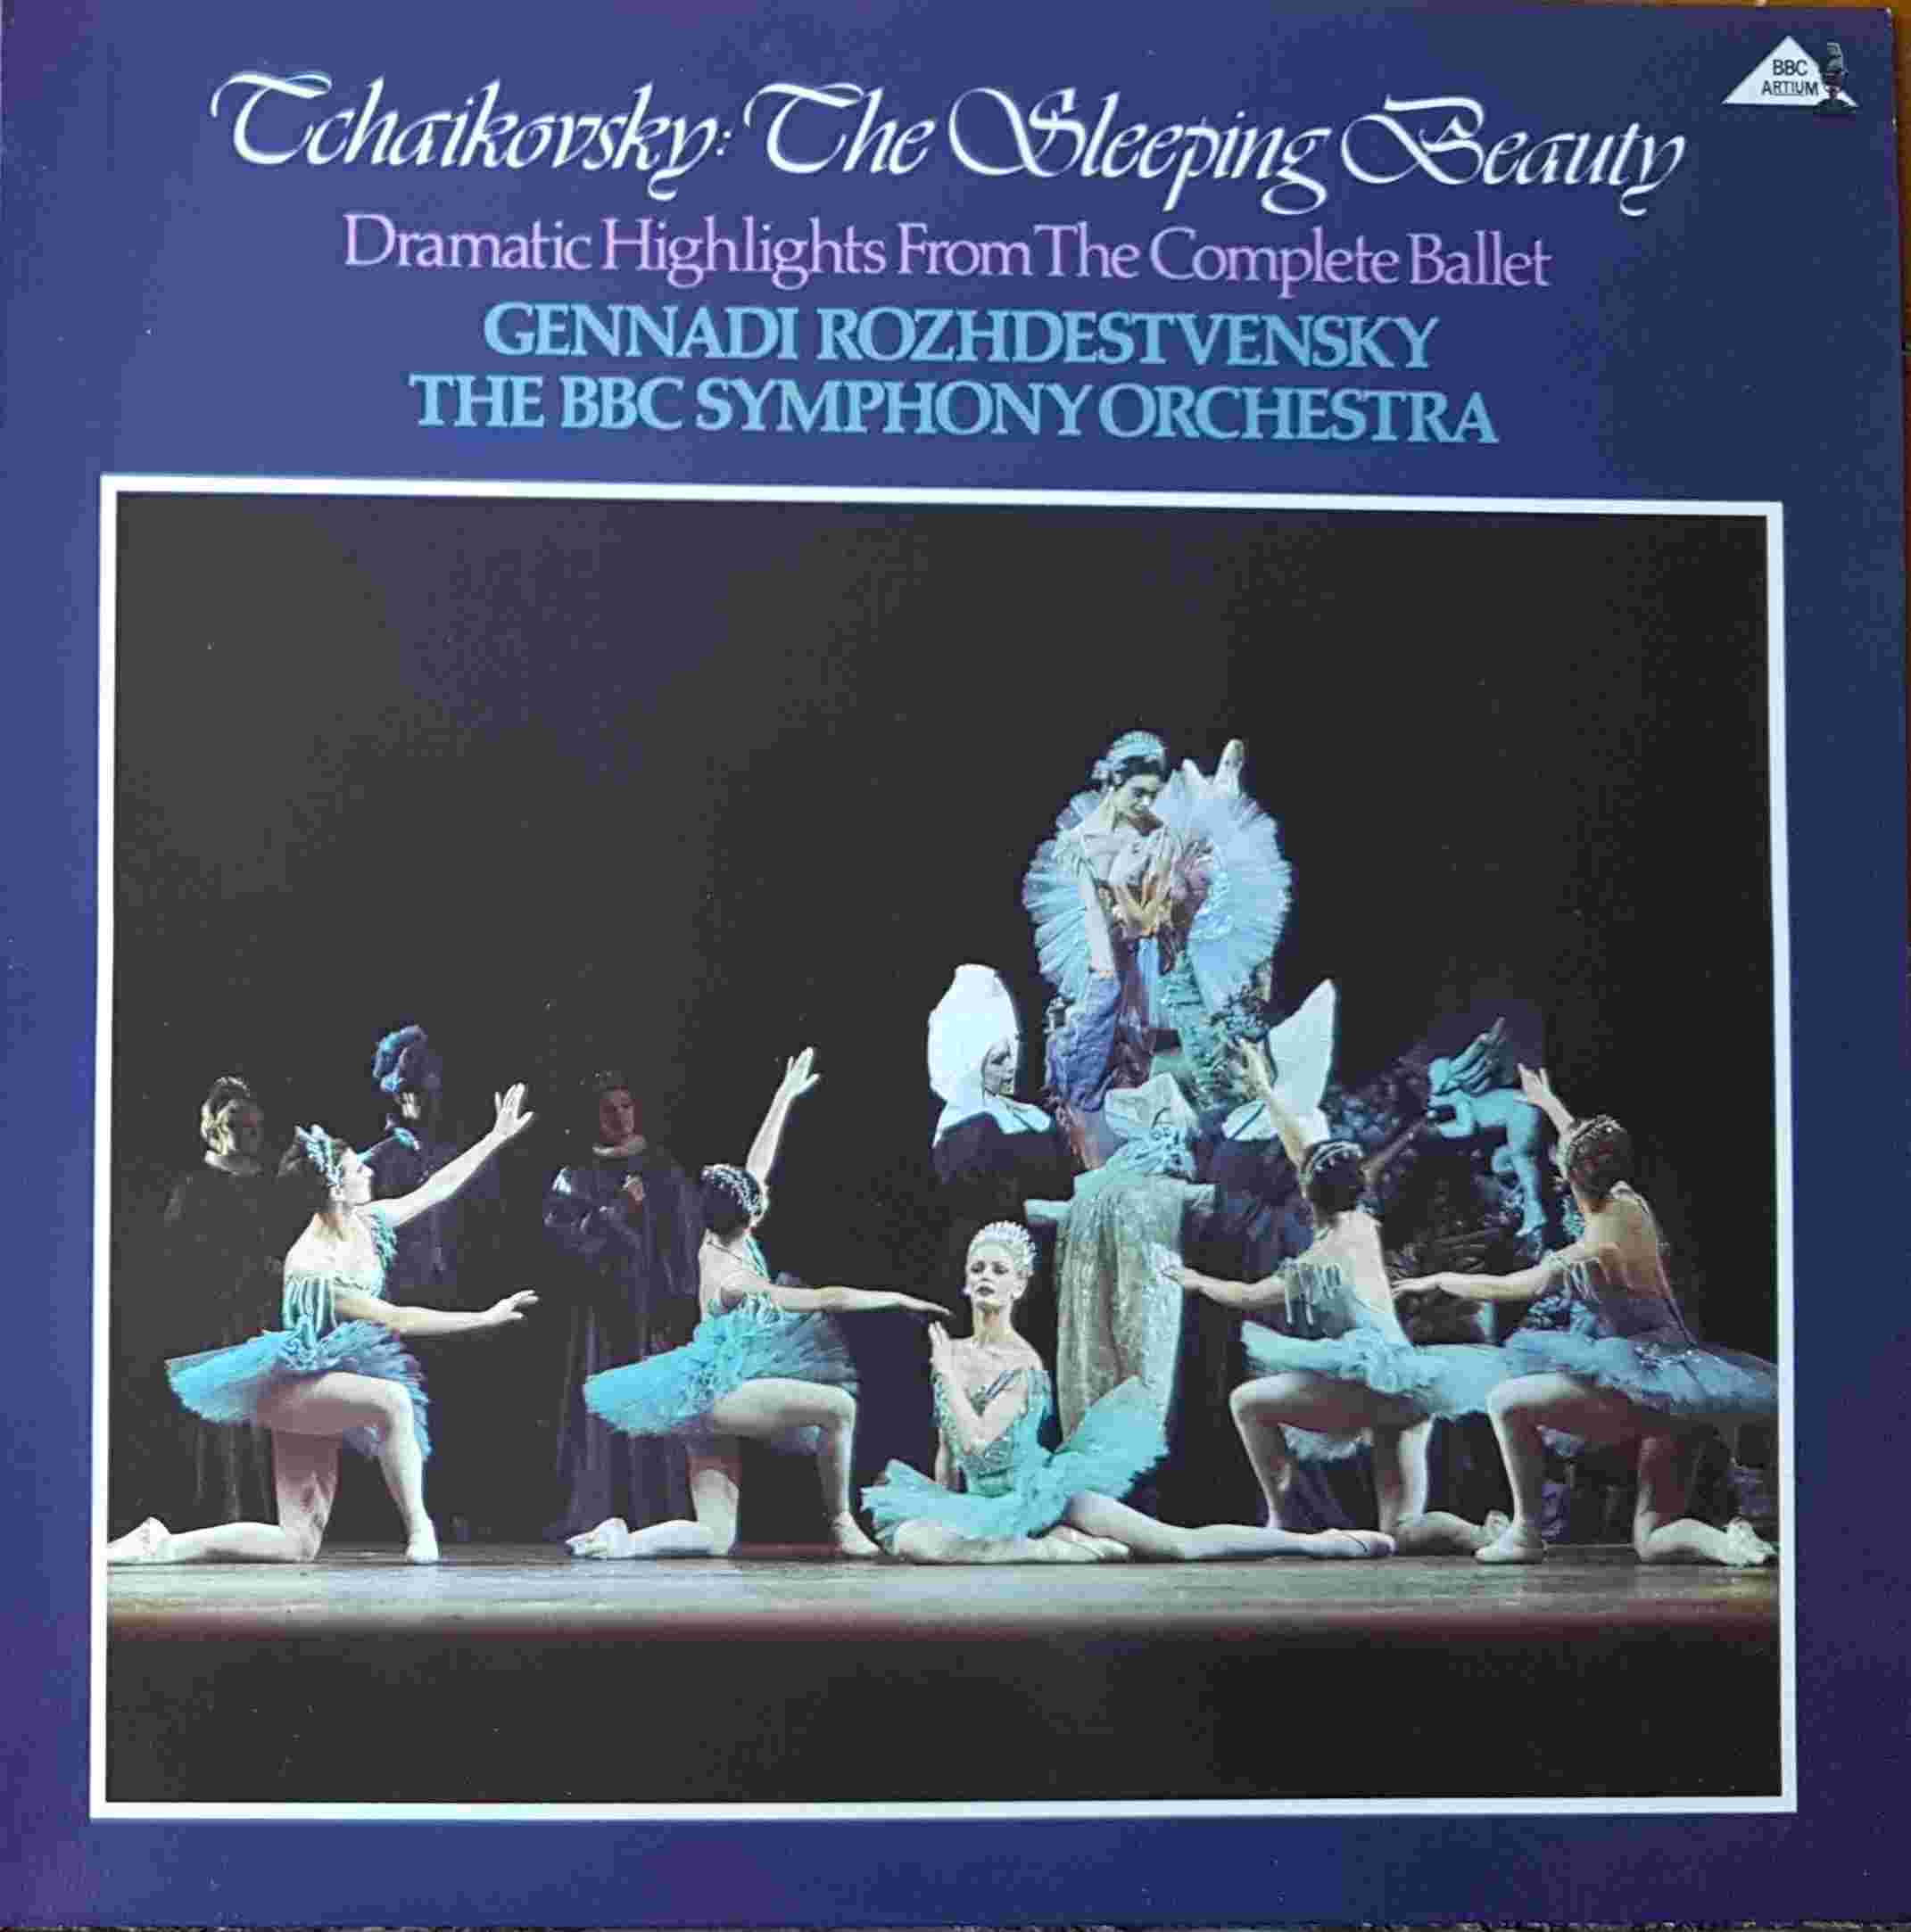 Picture of REGL 418 Tchaikovsky - The sleeping beauty (Highlights) by artist Tchaikovsky from the BBC albums - Records and Tapes library